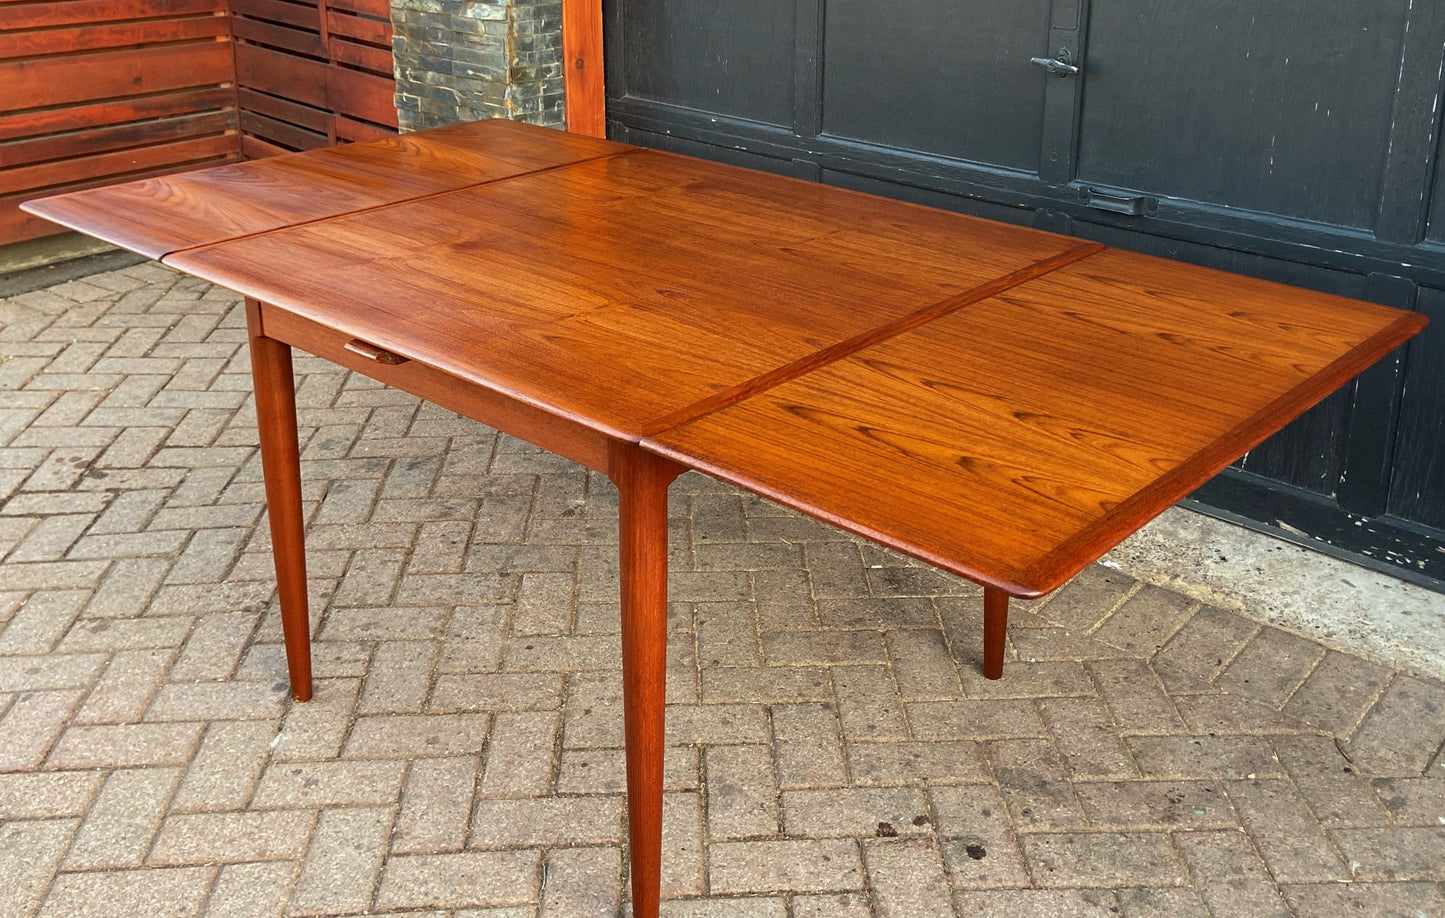 REFINISHED Danish MCM Teak Draw Leaf Table by A. H. Olsen for Skovmand & Andersen, 39"-75", PERFECT